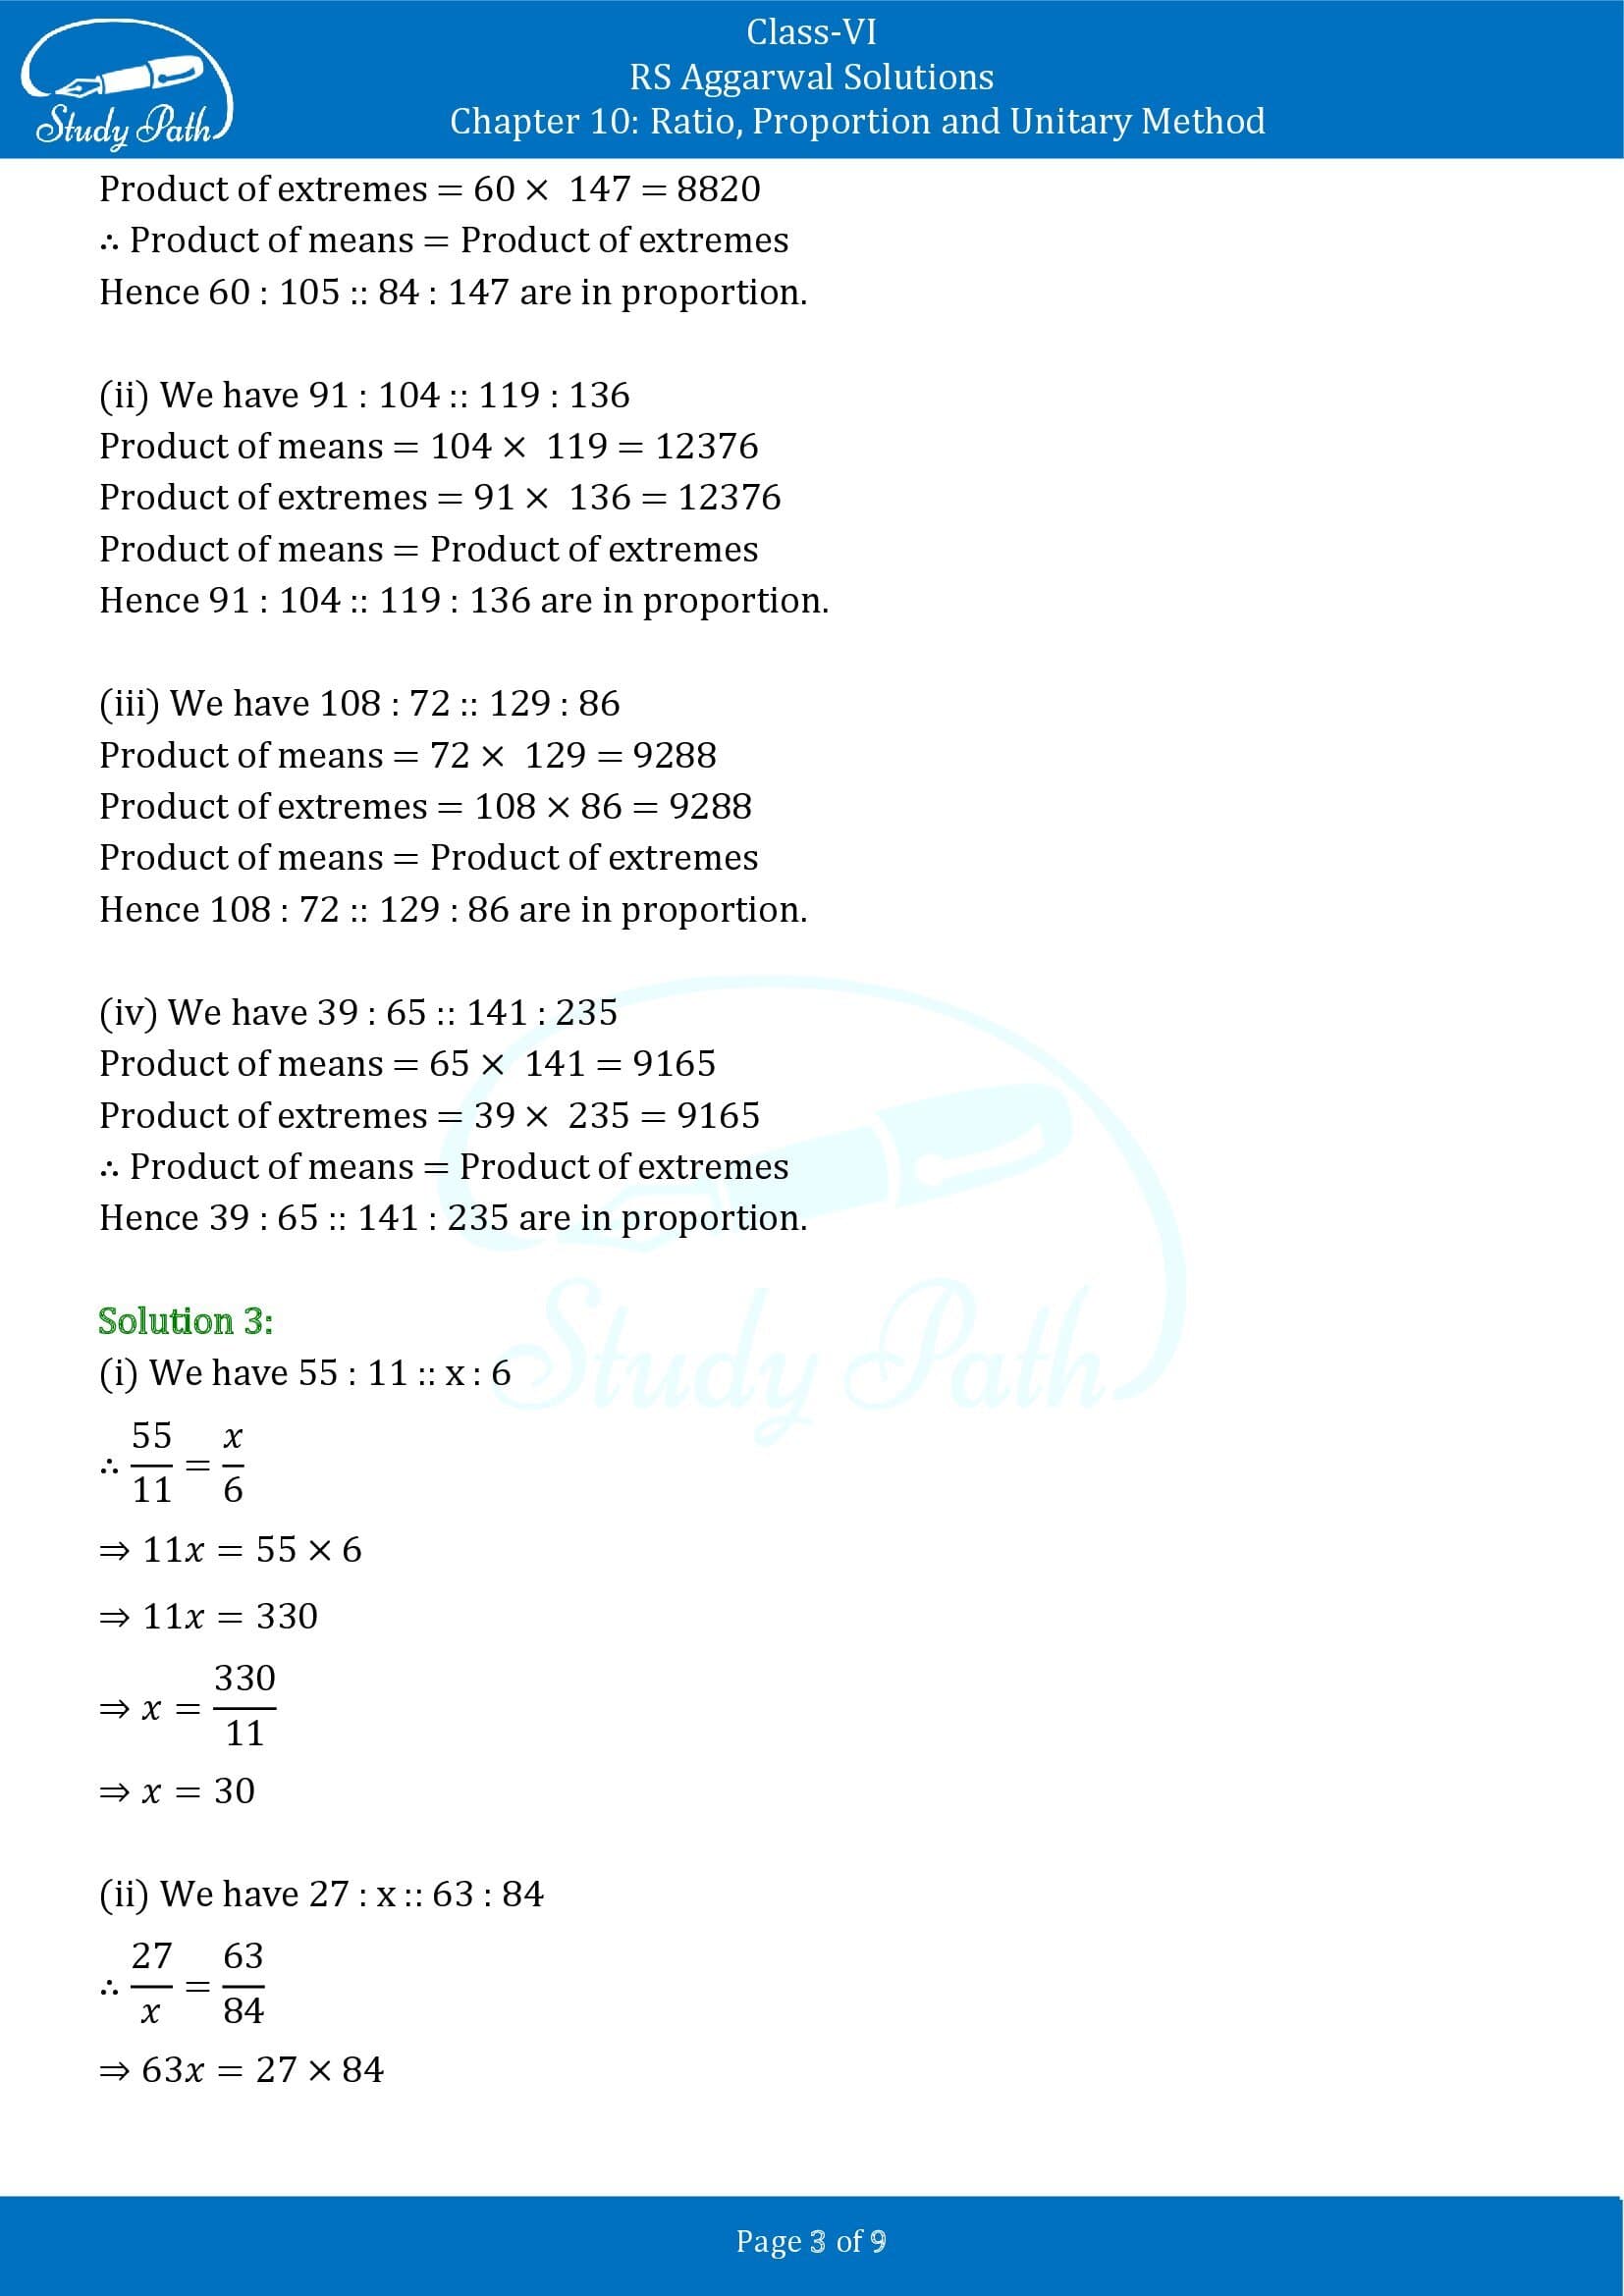 RS Aggarwal Solutions Class 6 Chapter 10 Ratio Proportion and Unitary Method Exercise 10B 00003